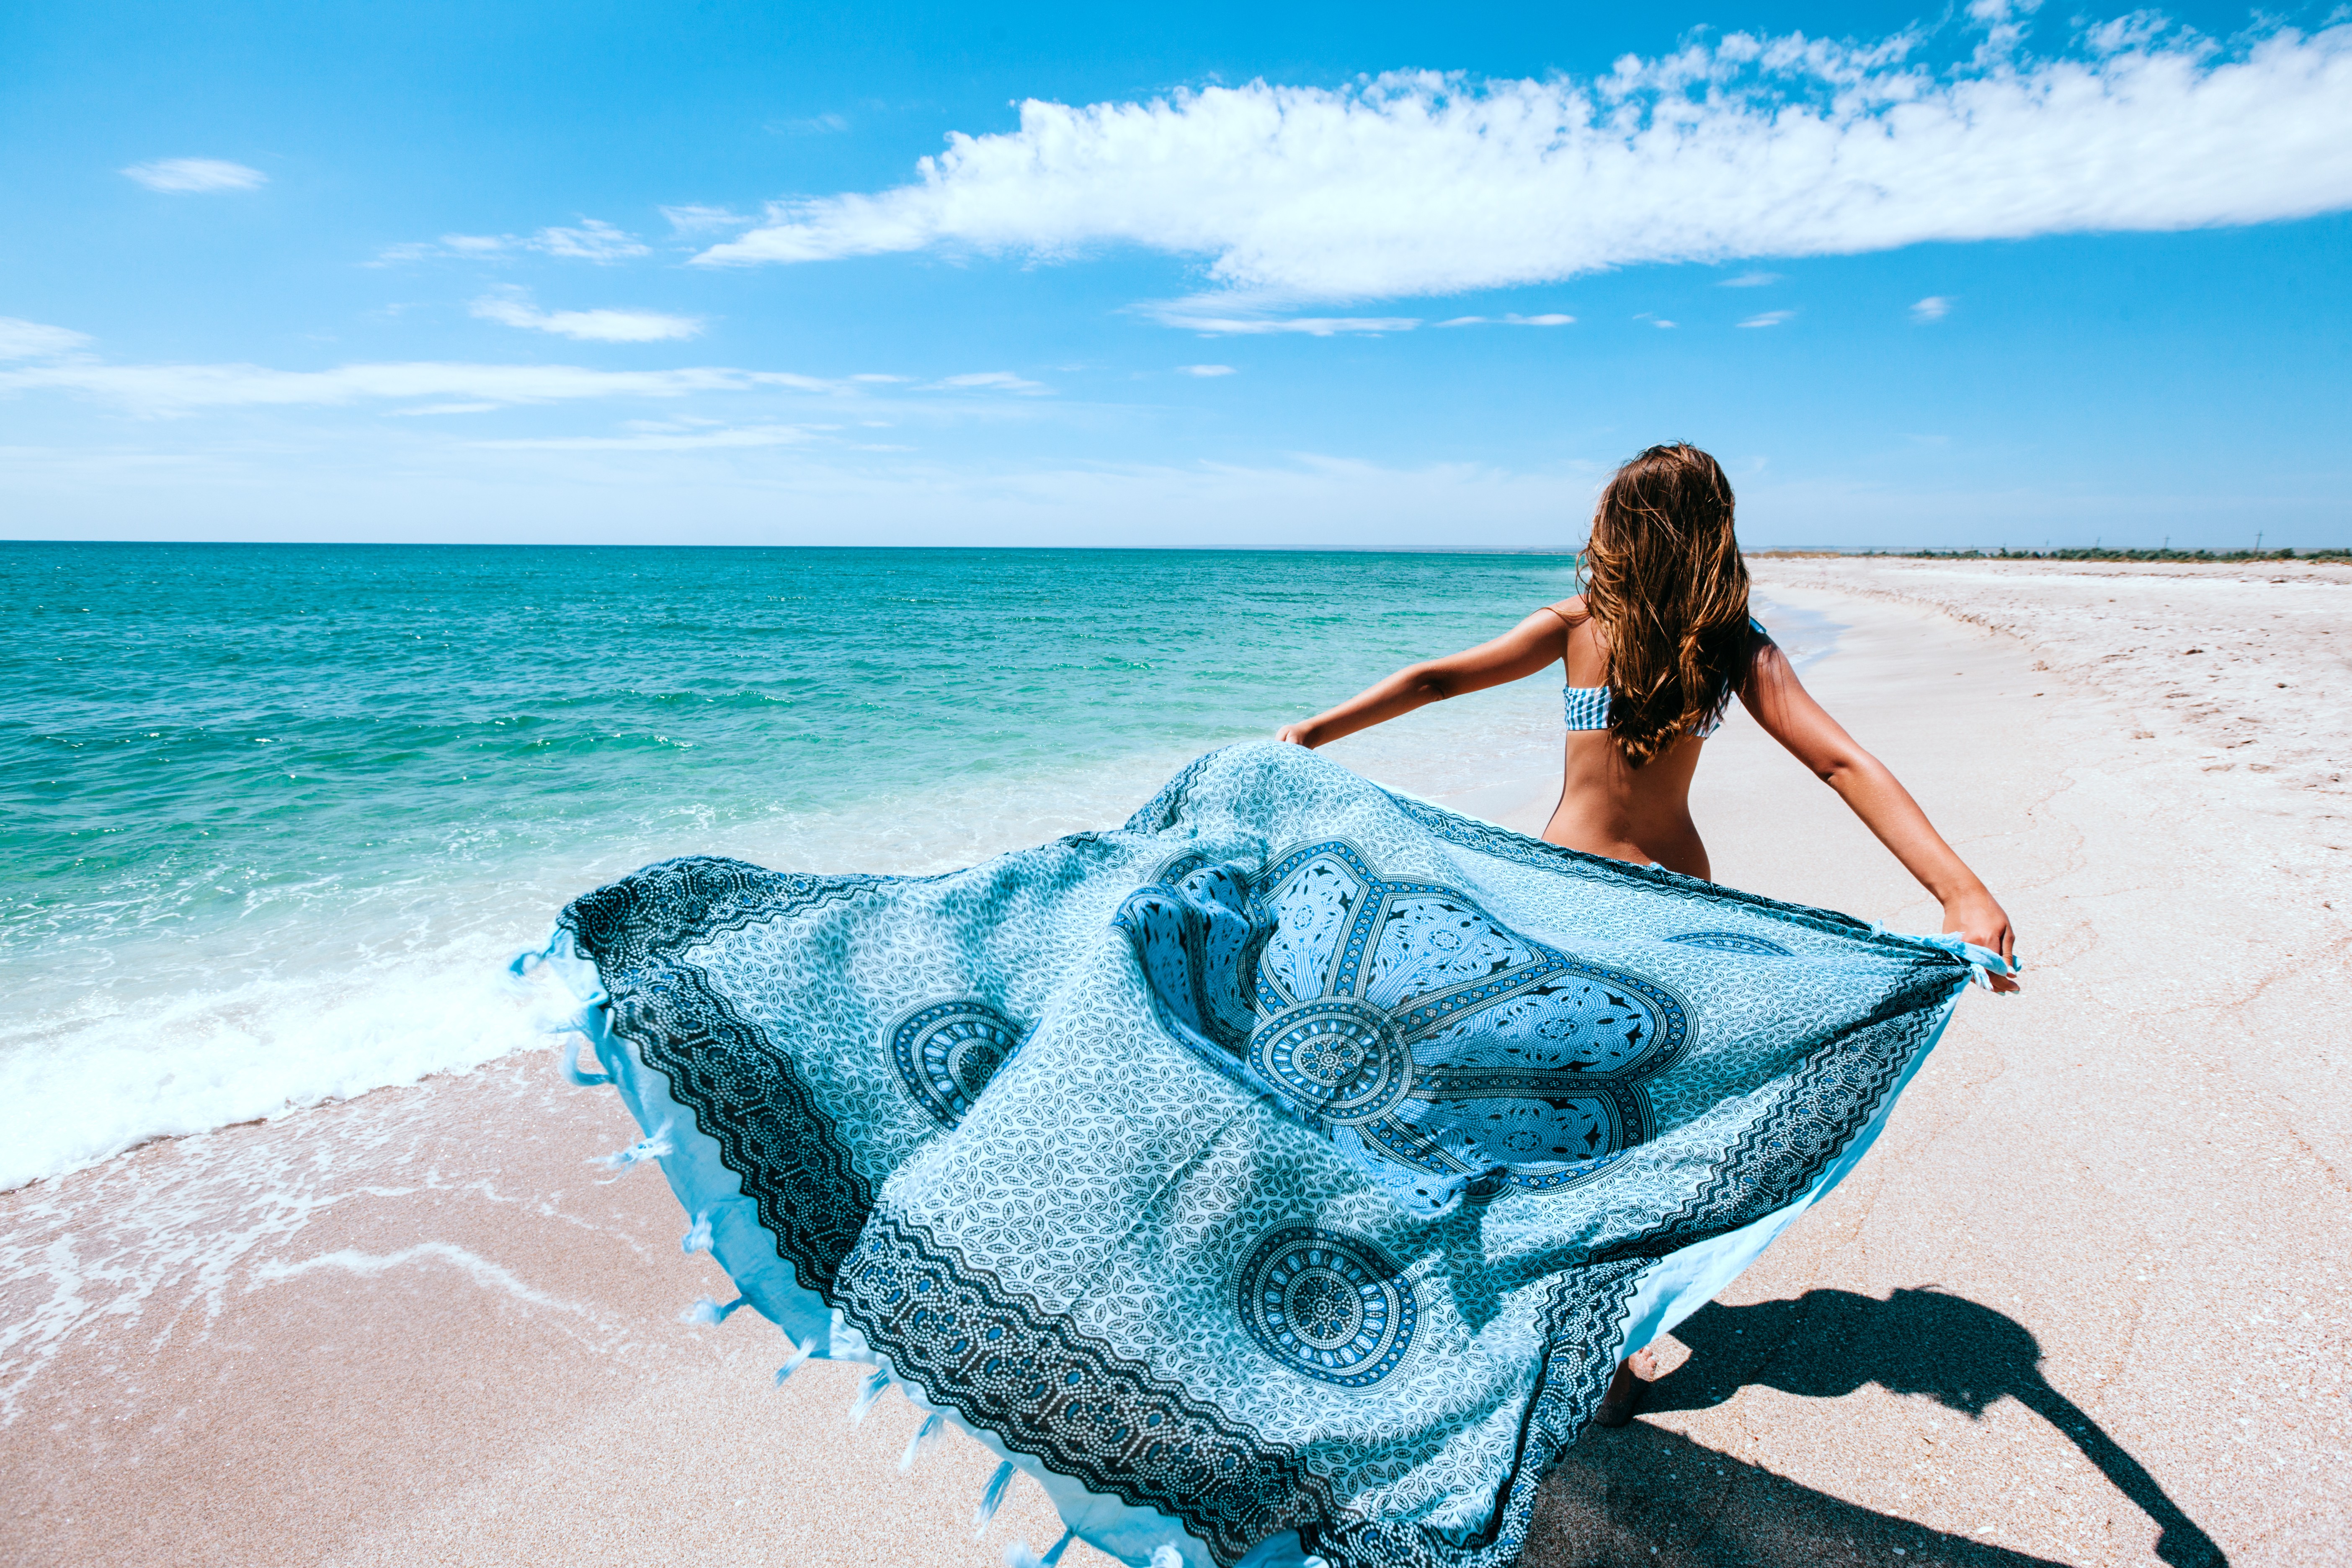 More flattering than a kaftan, sarongs can hide a multitude of sins and help draw attention to the bits we don’t mind showing off. Photo: Shutterstock